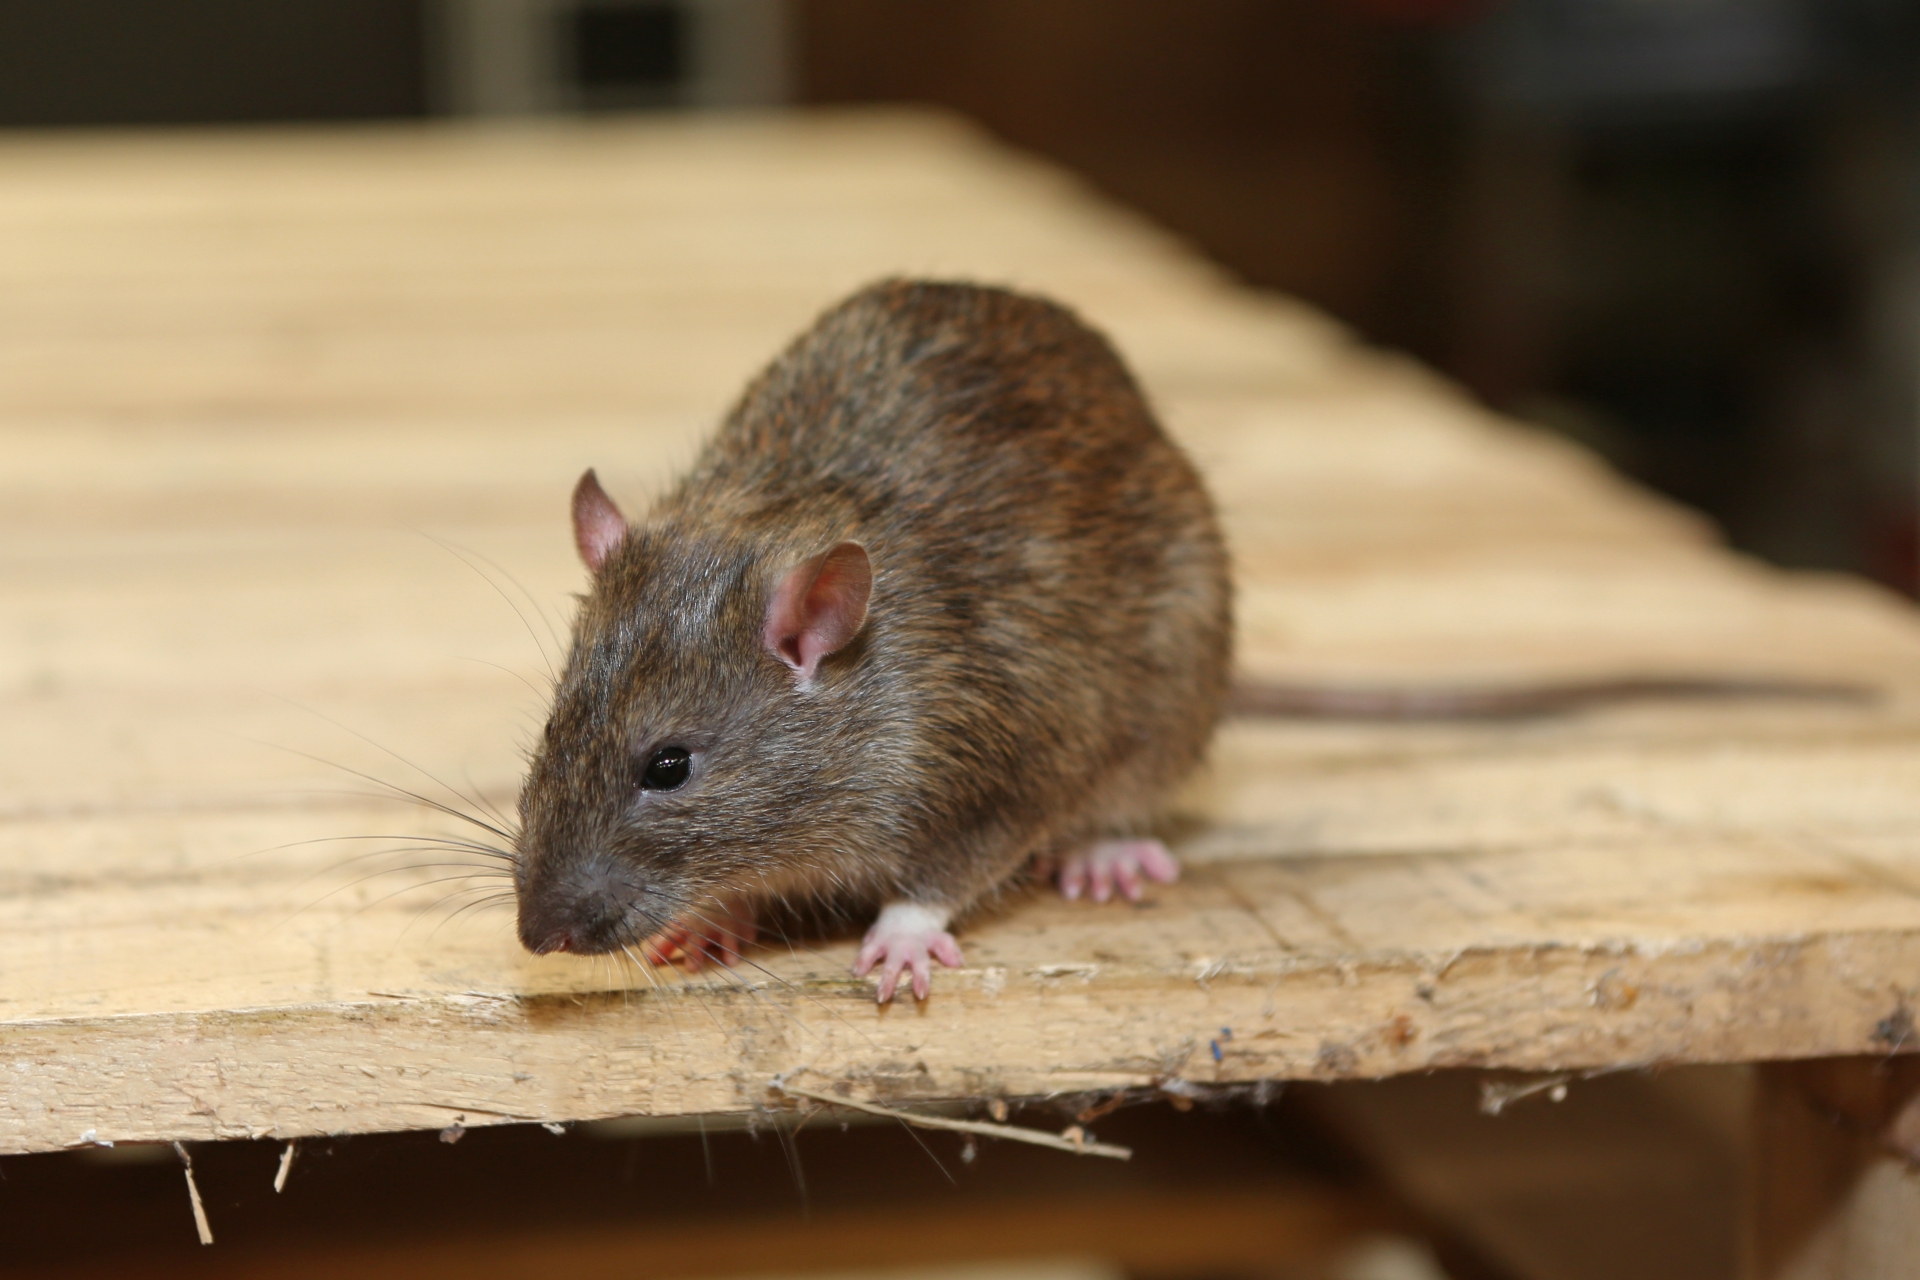 Rat Infestation, Pest Control in Rotherhithe, South Bermondsey, Surrey Docks, SE16. Call Now 020 8166 9746